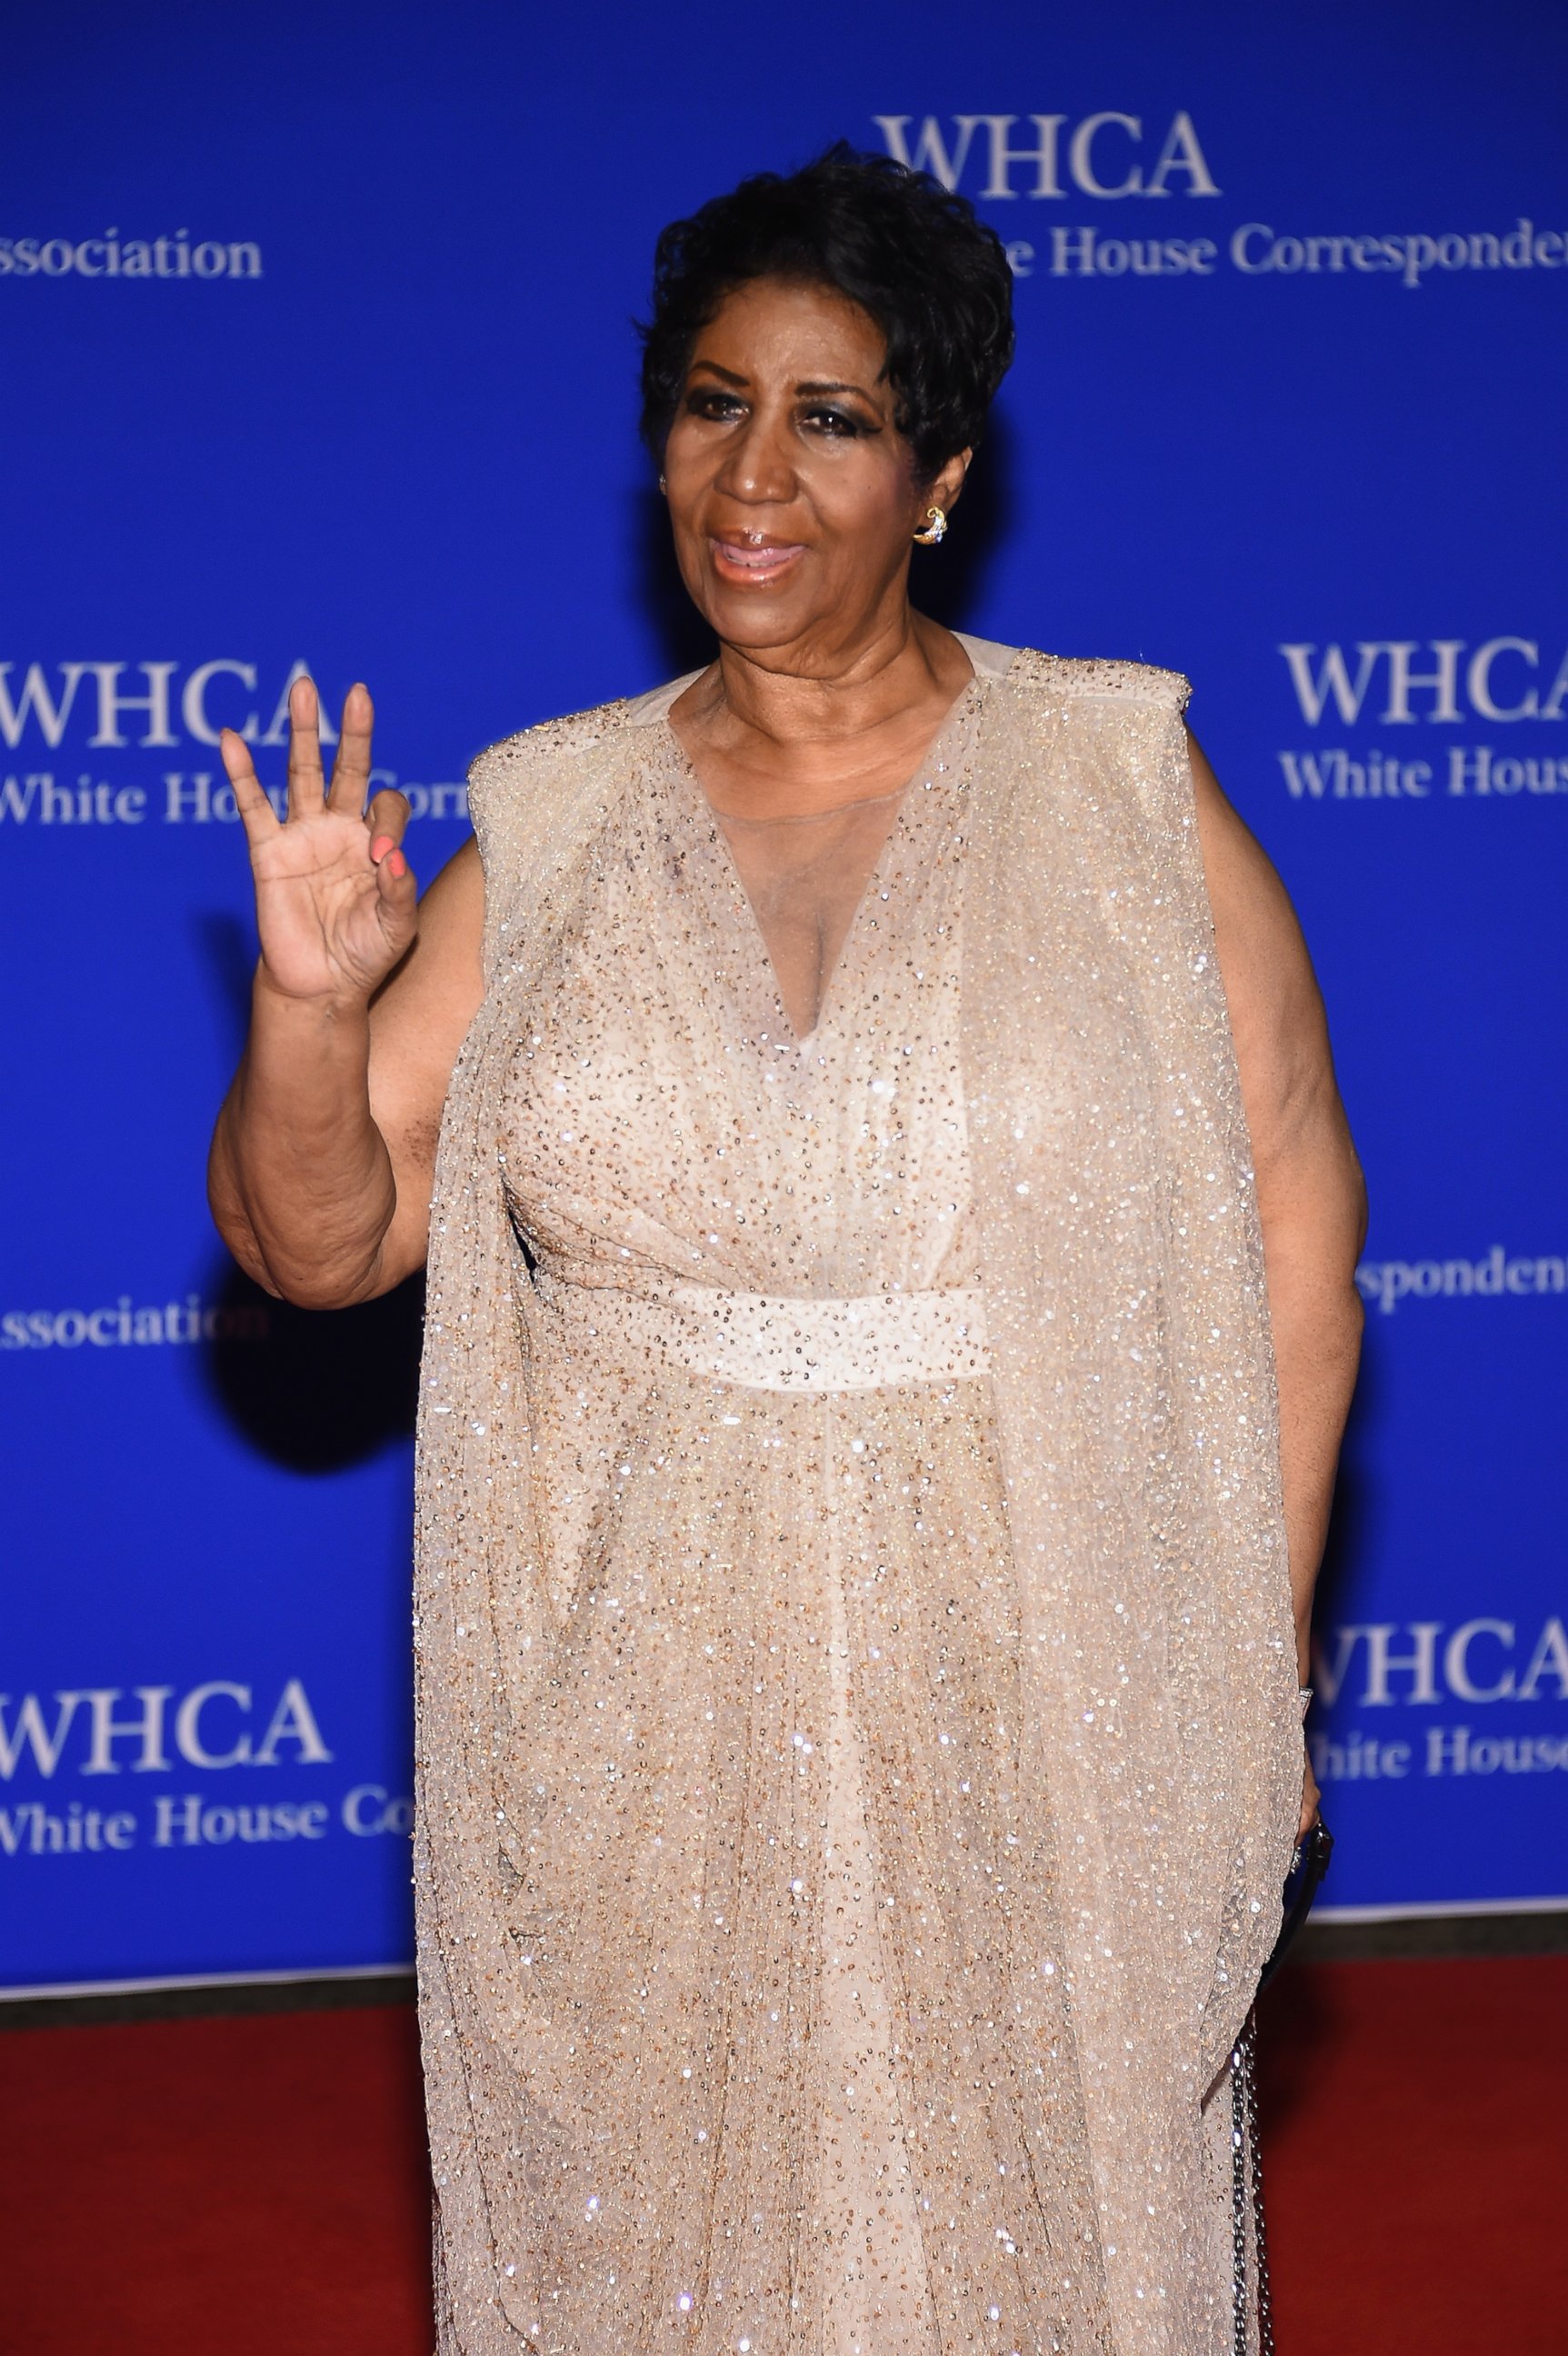 PHOTO: Aretha Franklin attends the 102nd White House Correspondents' Association Dinner  on April 30, 2016 in Washington. 